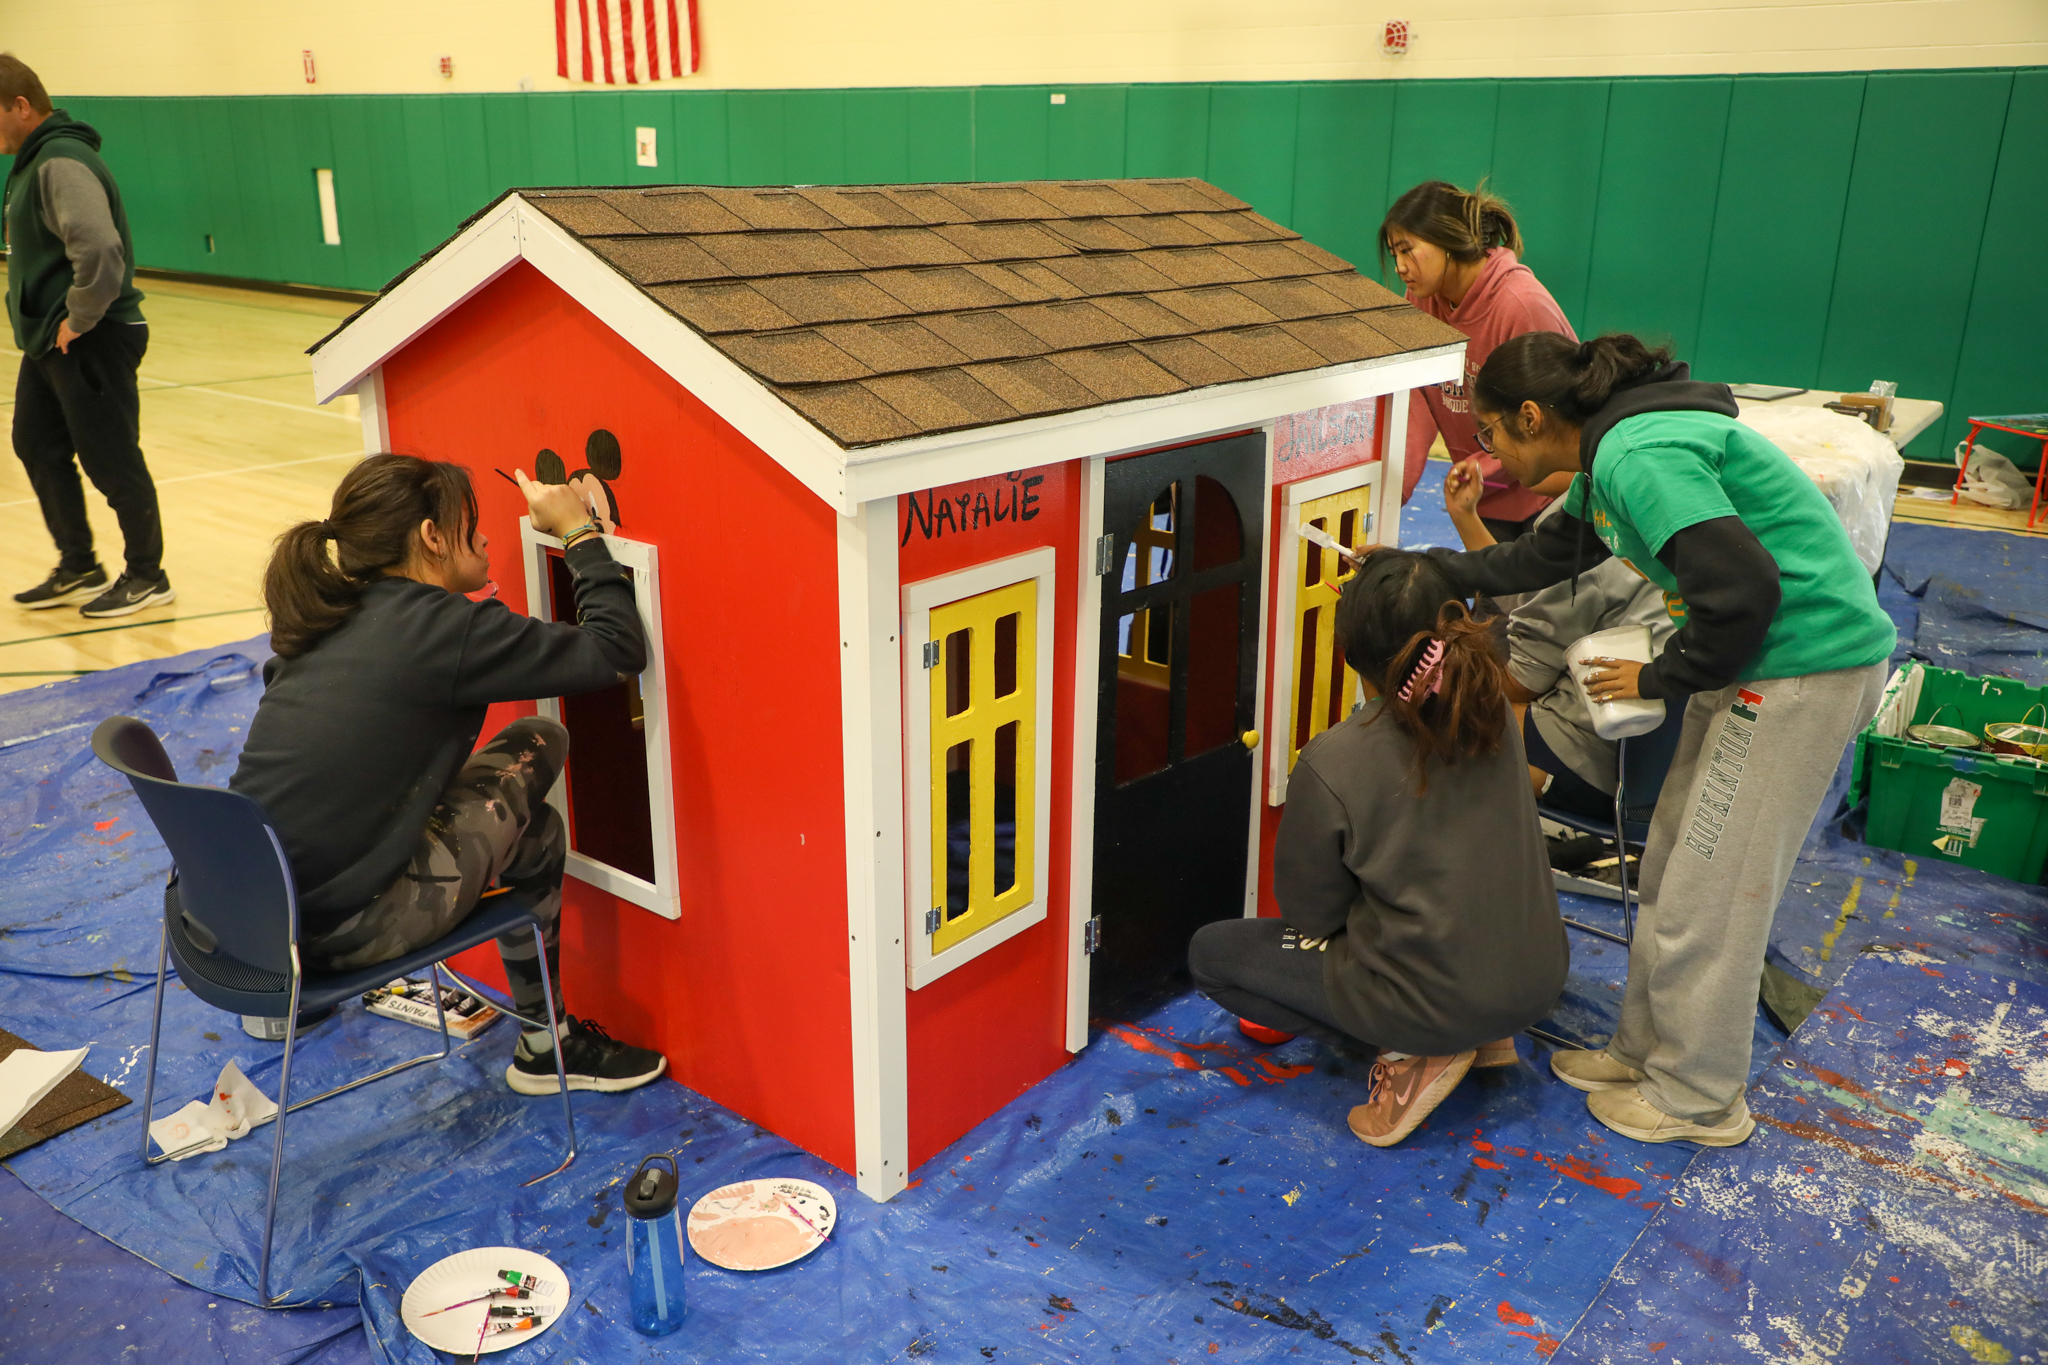 HHS Habitat for Humanity club builds playhouse for veteran’s children